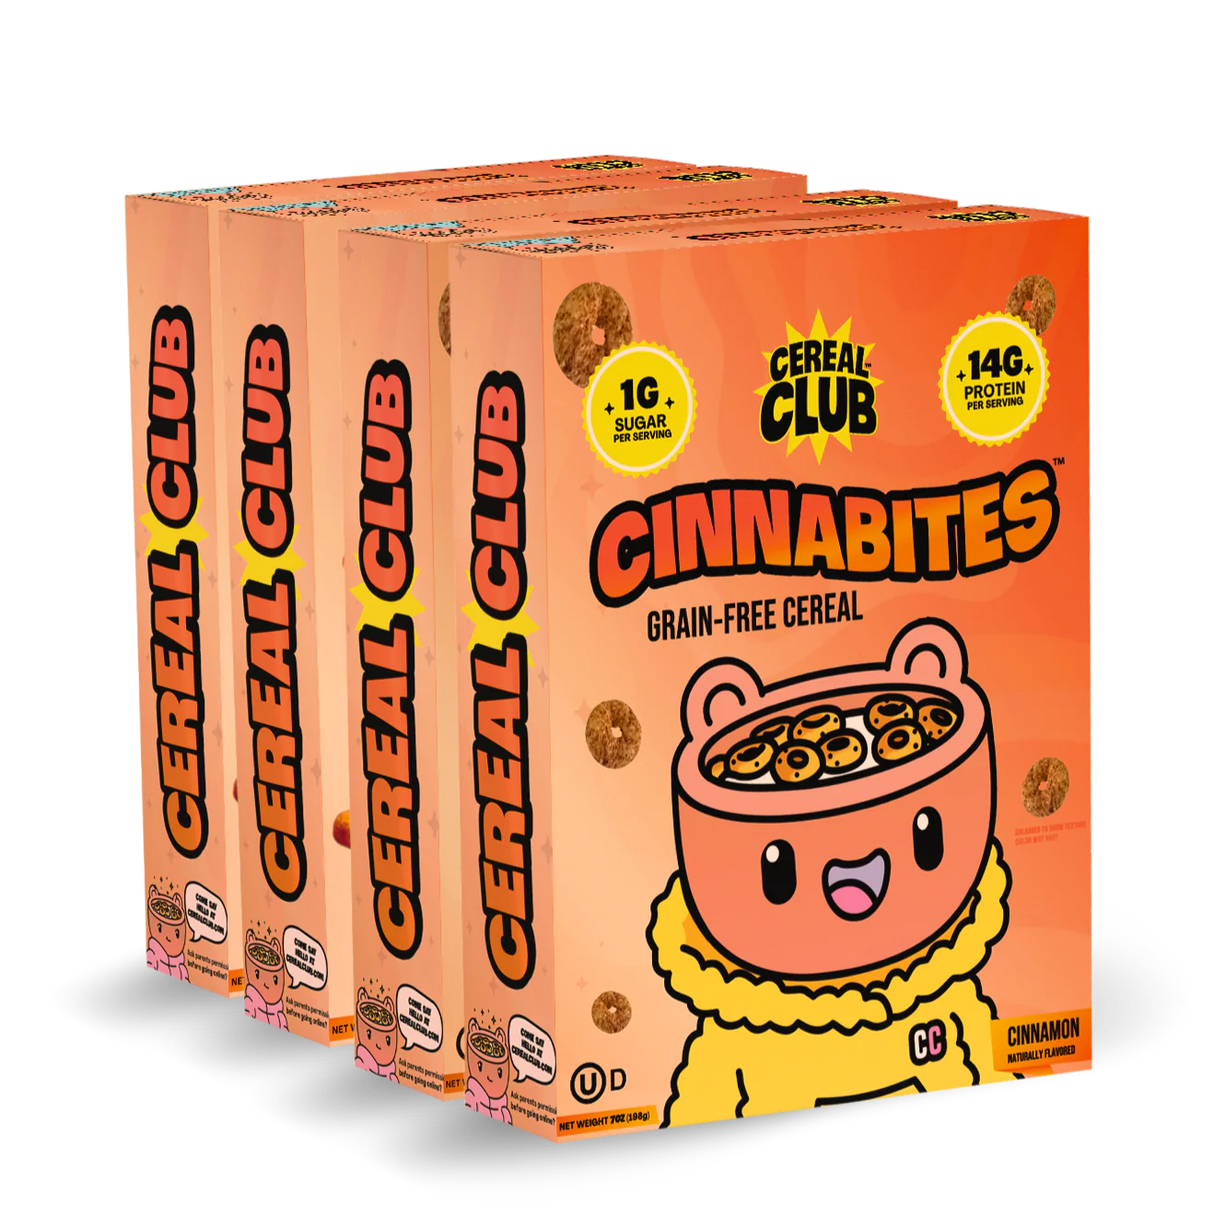 Cereal Club 4 pack - Cereal Club